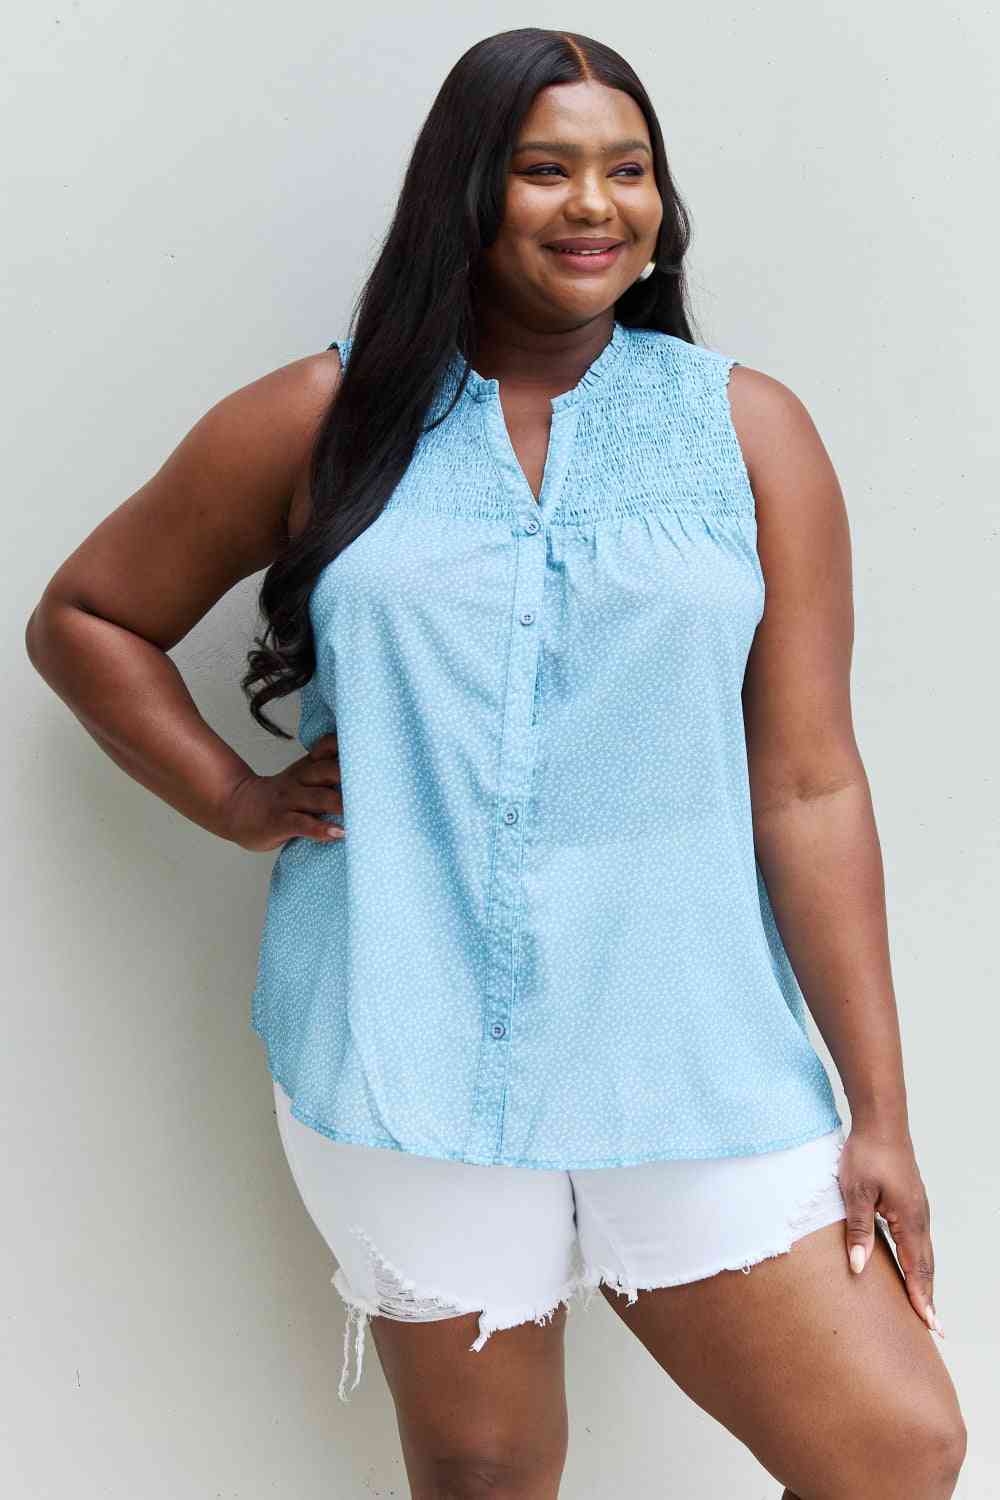 She Means Business Full Size Ruffled Floral Flare Shirt - Pastel Blue / S - T-Shirts - Shirts & Tops - 1 - 2024